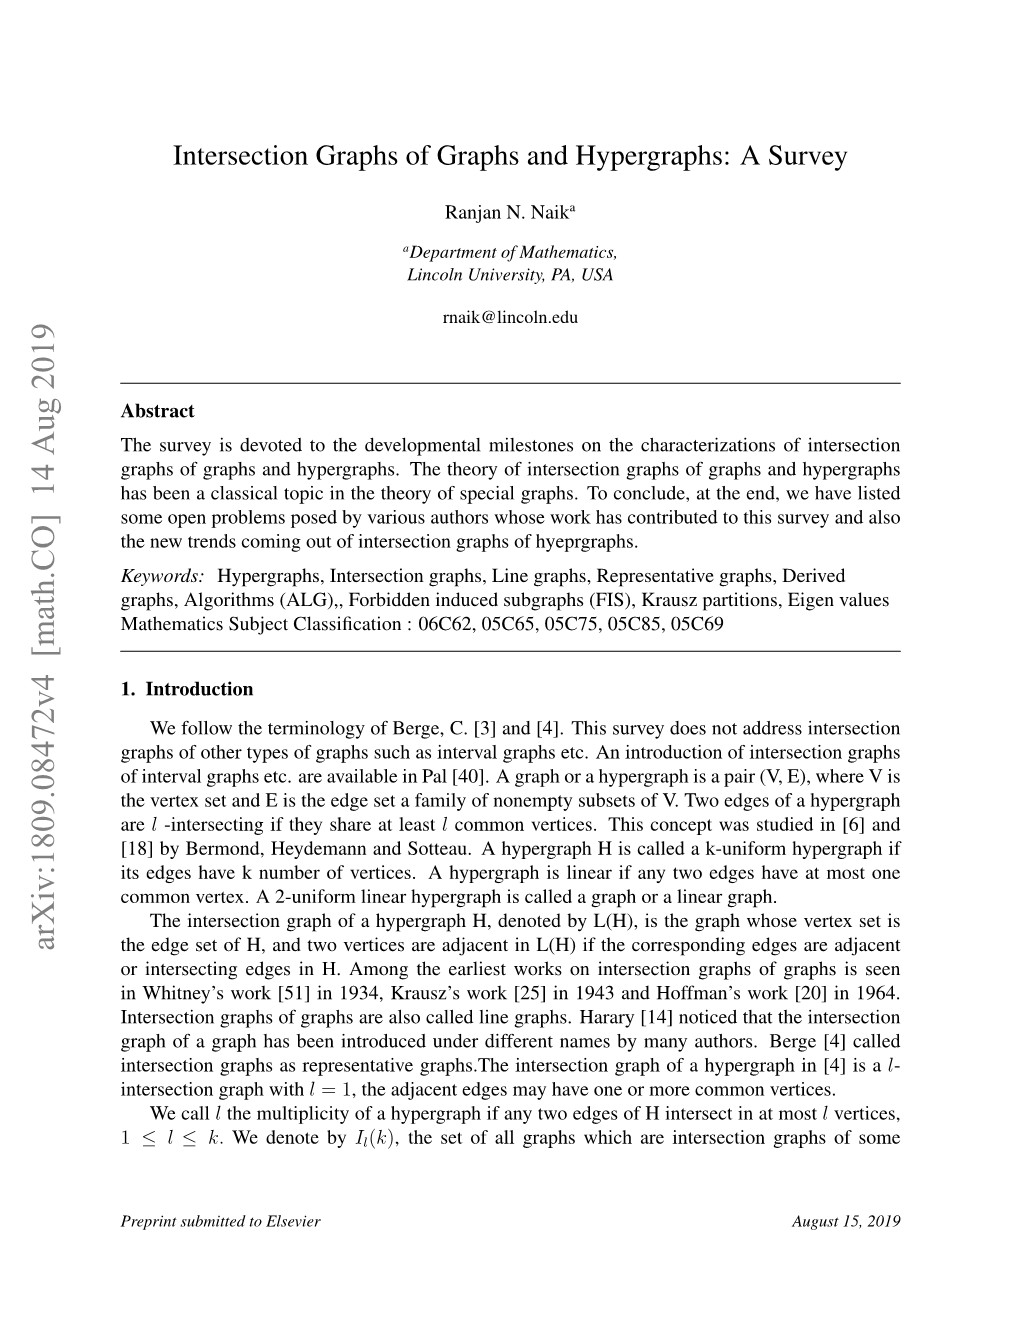 On Intersection Graphs of Graphs and Hypergraphs: a Survey